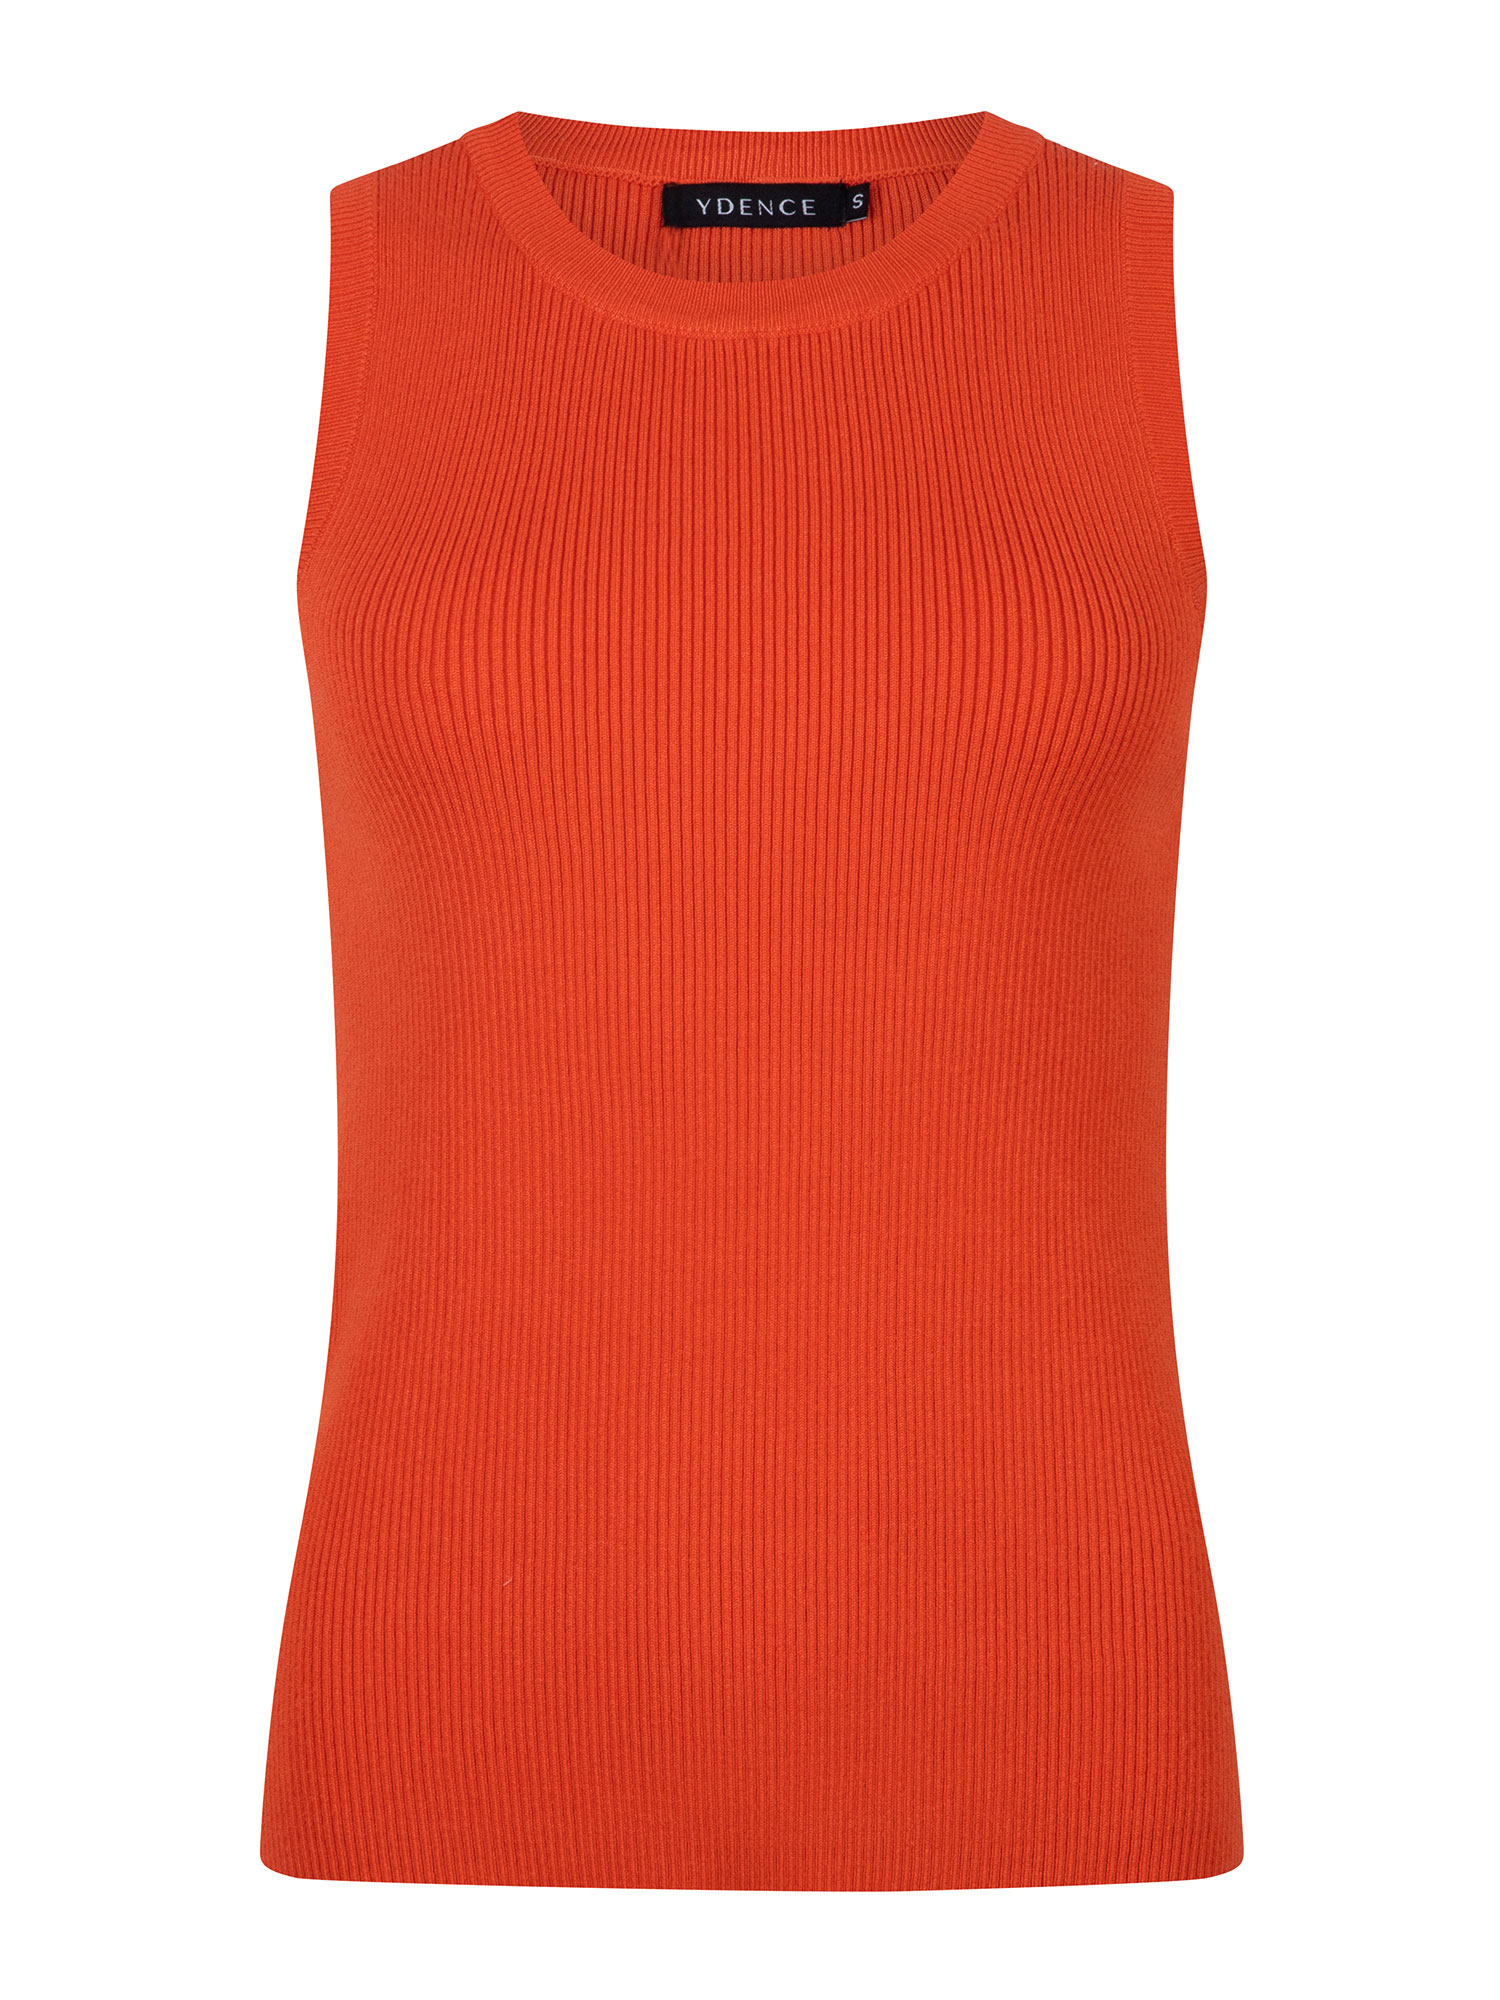 Ydence Knitted top Sarah Orange/red